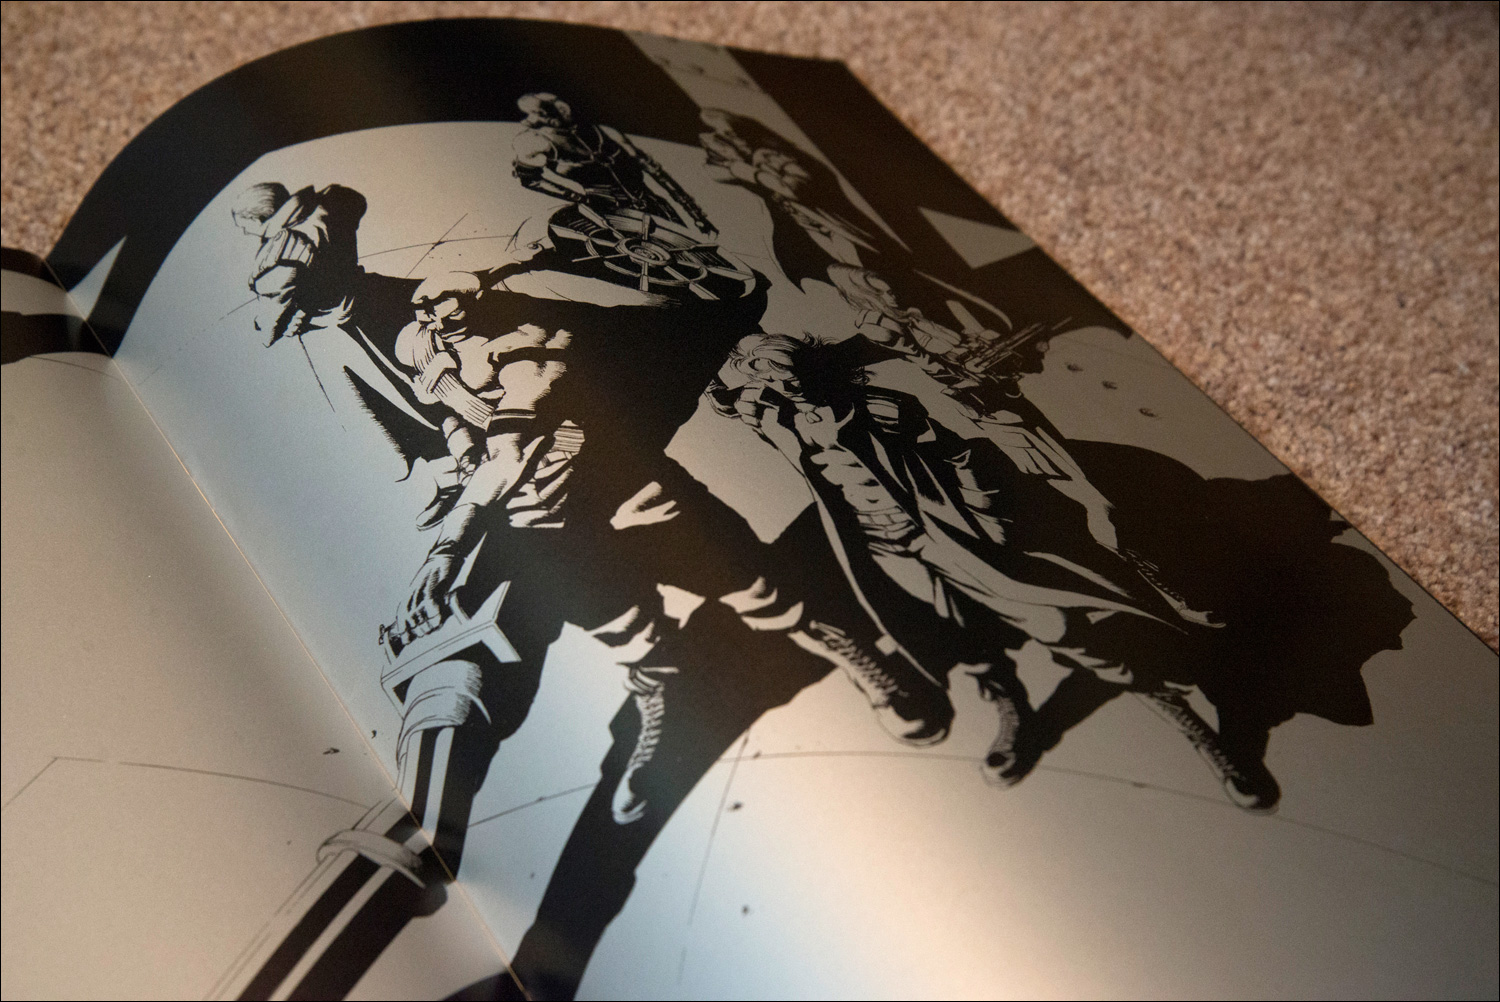 Metal-Gear-Solid-Premium-Package-Classified-Book-FOXHOUND